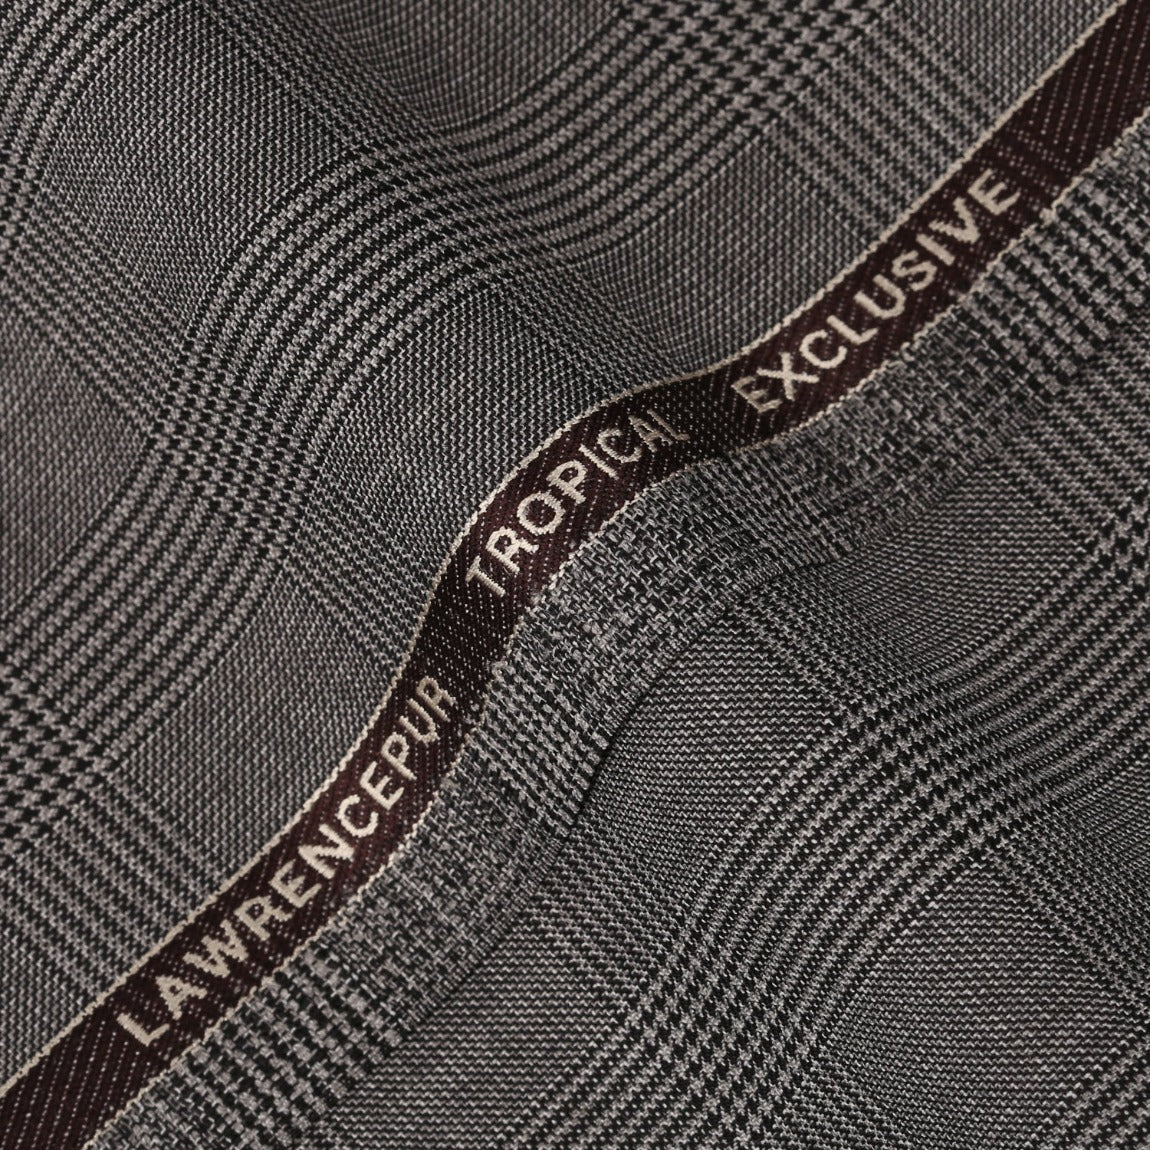 Glen Plaid Checks-Light Grey, Wool Blend, Tropical Exclusive Suiting Fabric